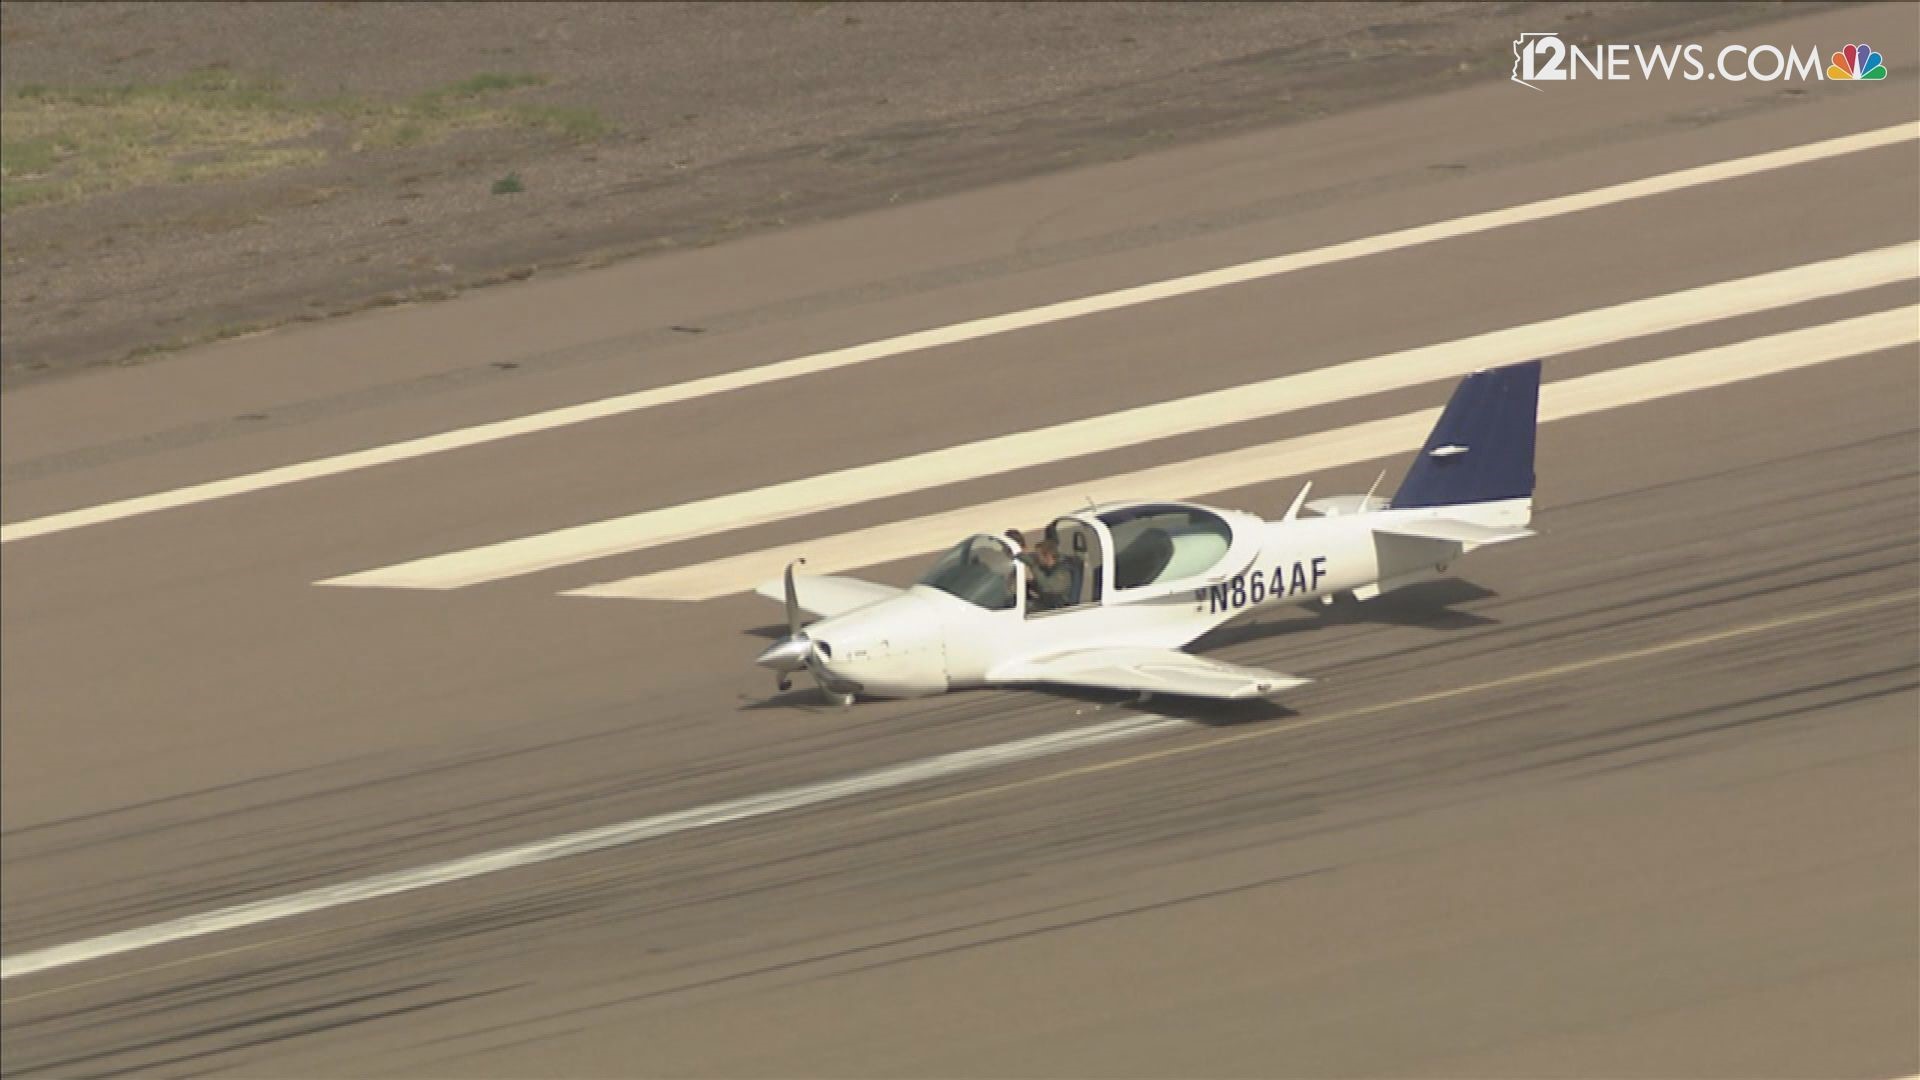 Sky 12 was at Phoenix Goodyear Airport where a small plane made a belly landing due to issues with the landing gear. No one was hurt in the landing.